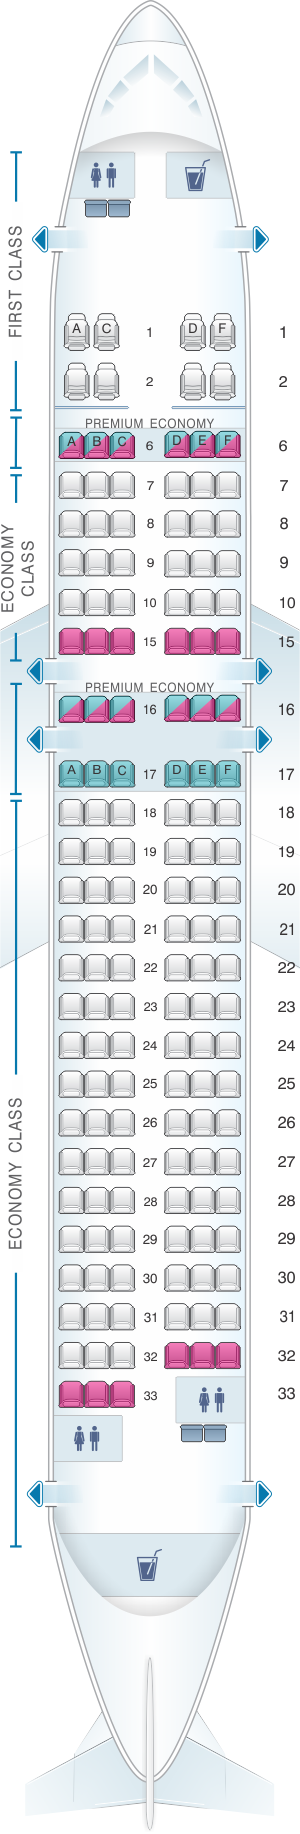 Seat map for Alaska Airlines - Horizon Air Airbus A320 214 sharklet